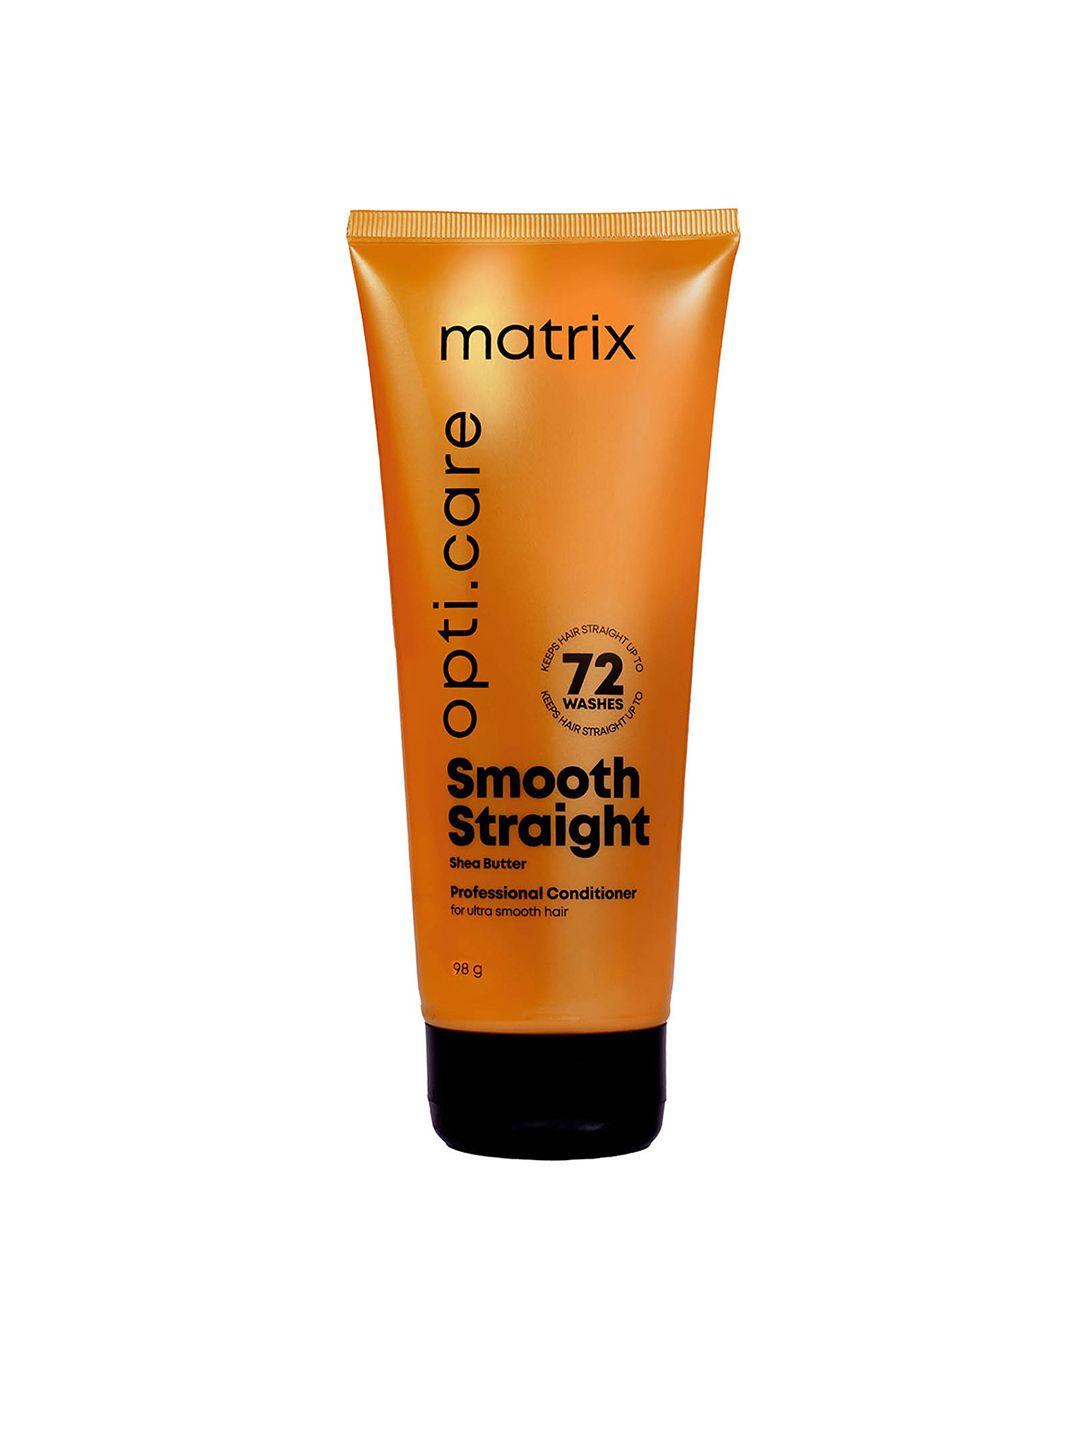 matrix opti care smooth straight professional conditioner with shea butter - 98g